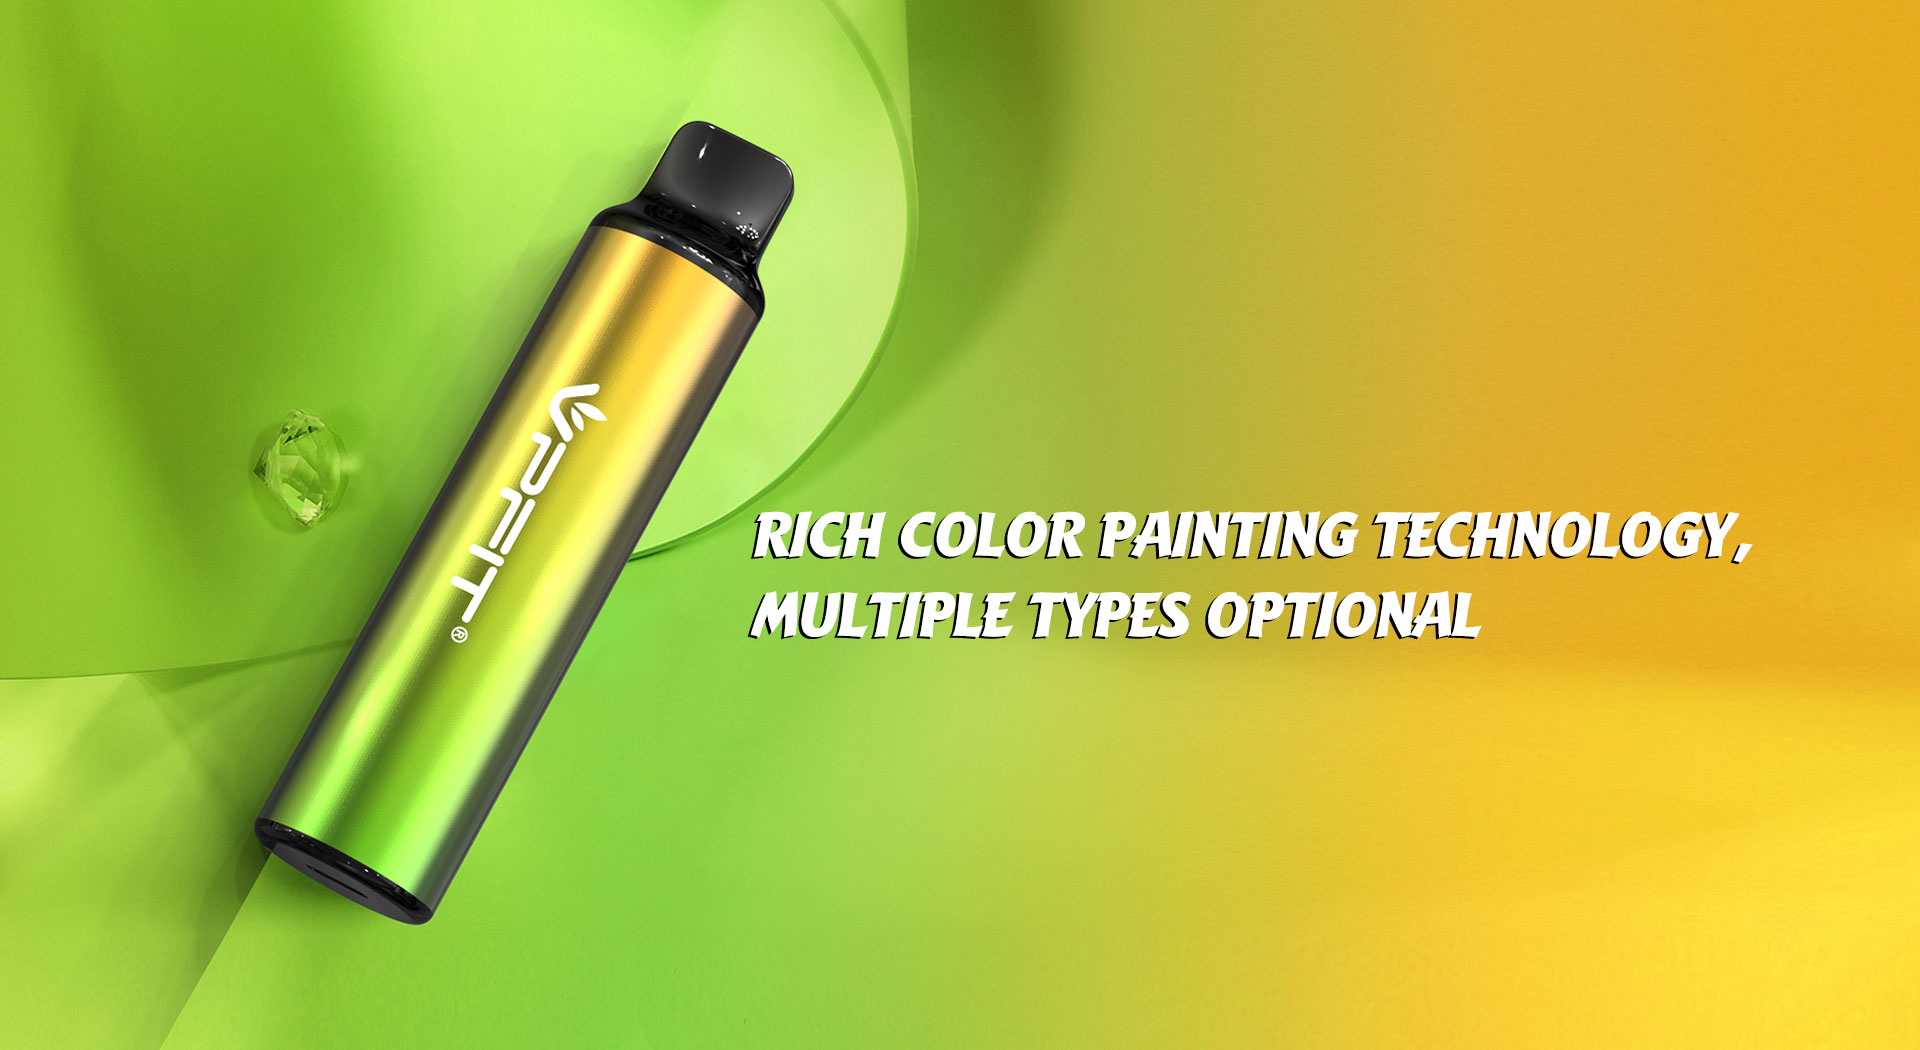 Rich color painting technology